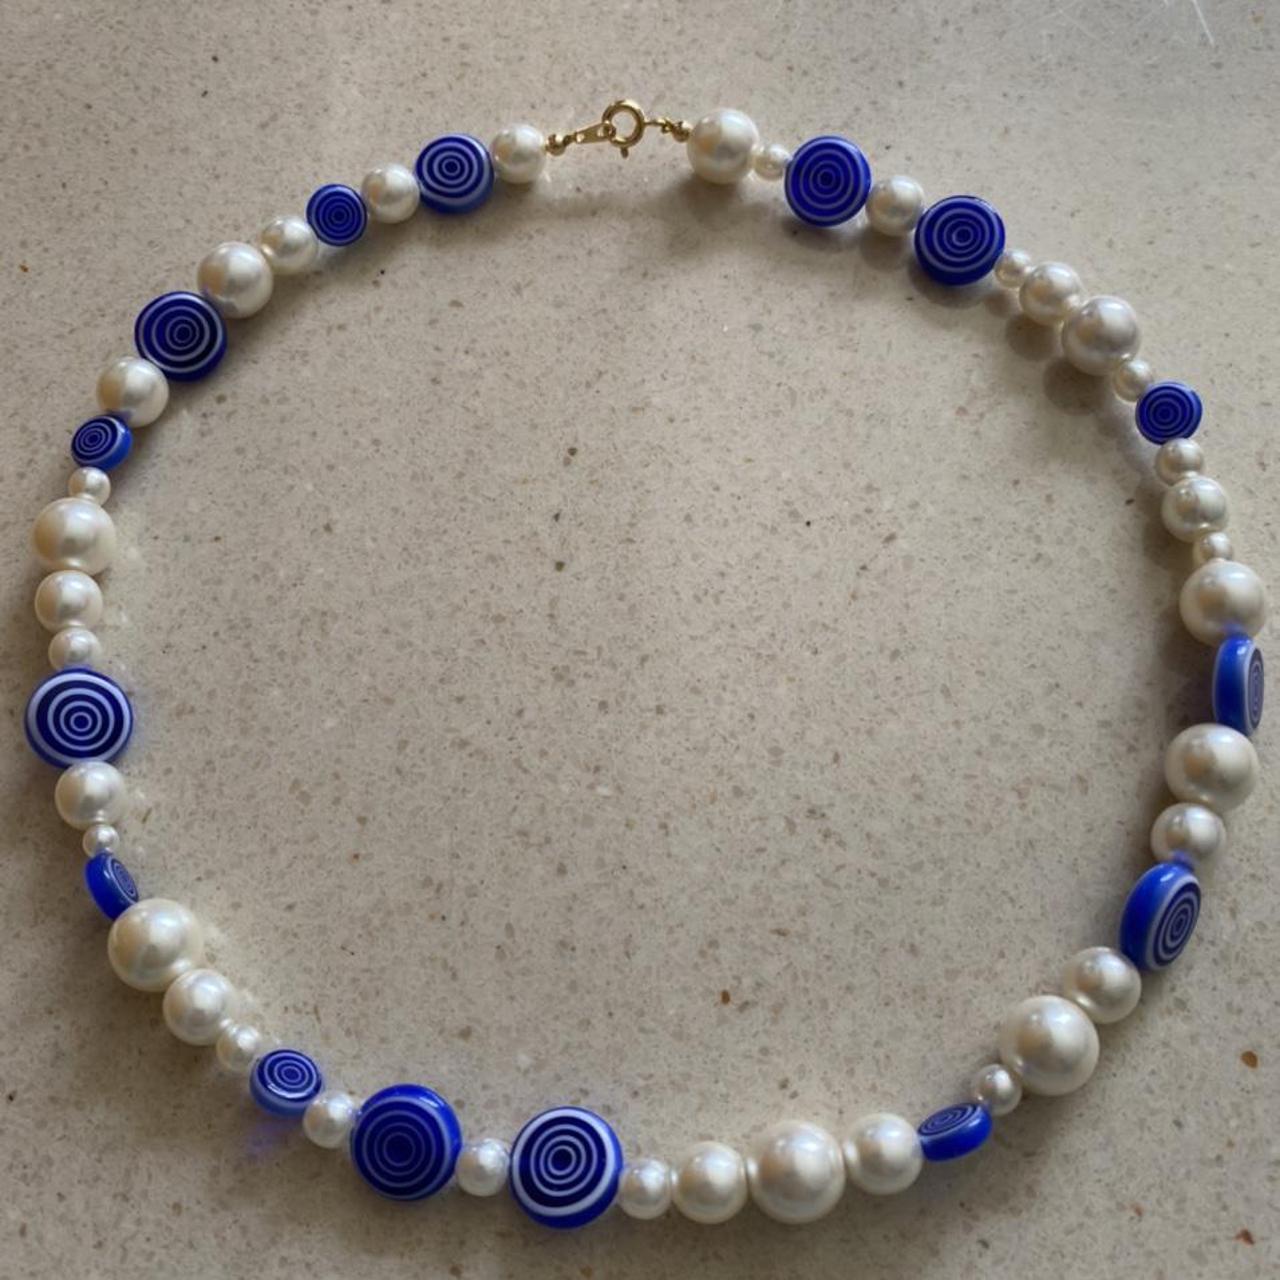 Women's White and Blue Jewellery (2)